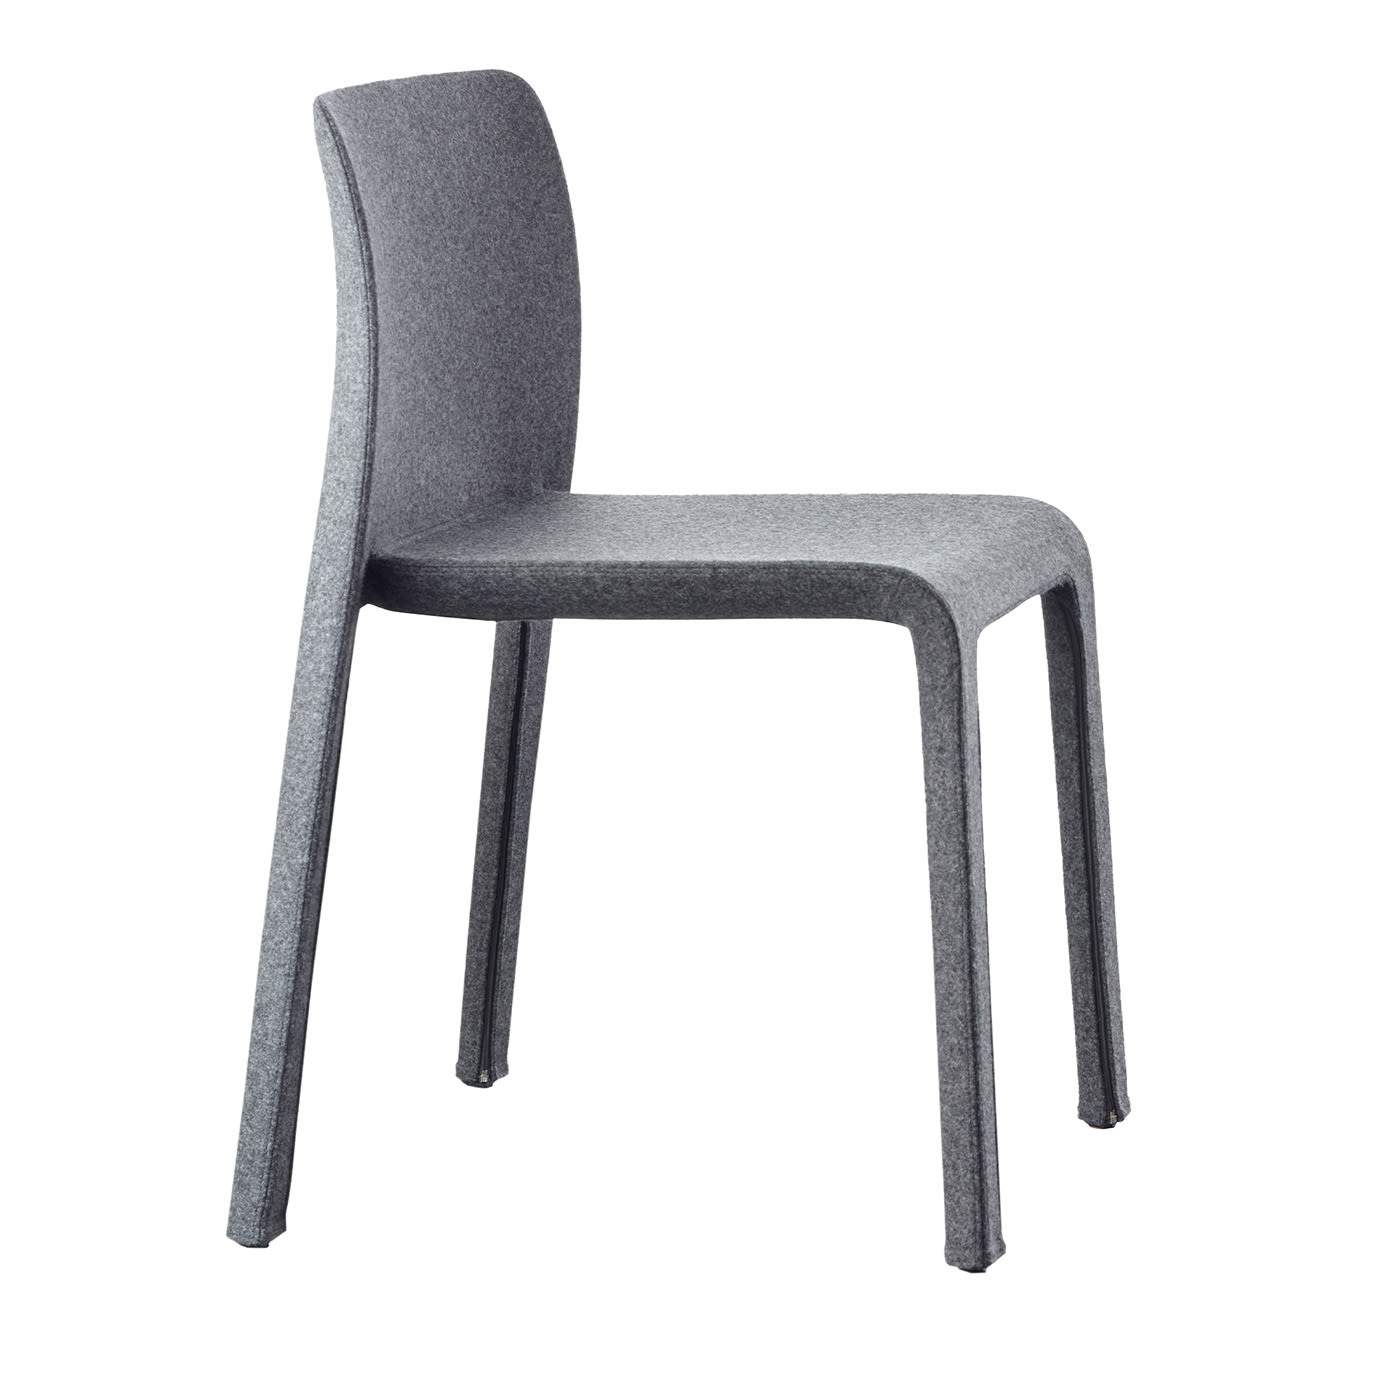 First Dressed Gray Chair by Stefano Giovannoni - Magis